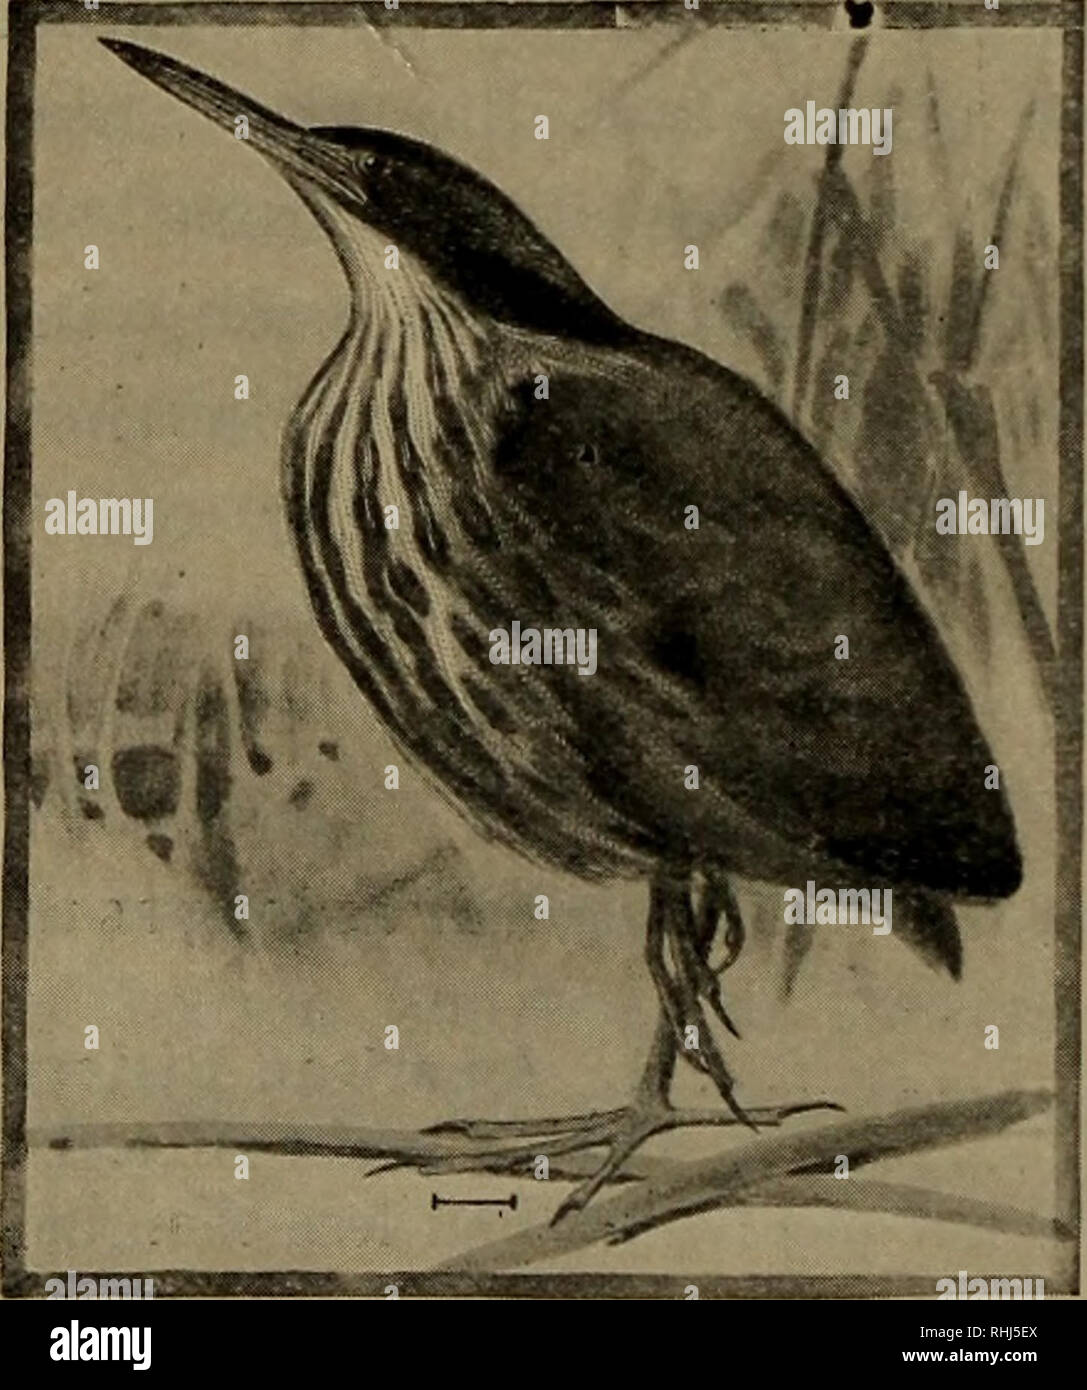 . Birds of the United States east of the Rocky Mountains, a manual for the identification of species in hand or in the bush;. Birds; Birds. 264 KEY AND DESCRIPTION B. Bill over a half inch shorter than the tarsus ; top and bottom of bill decidedly convex.1 14. Yellow-crowned Night Heron. C. Wing, 17-22 long ; plumage pure white 4. Great White Heron. C. Wing, 17-21 long ; upper part grayish or slaty-blue 5. Ward's Heron or 6. Great Blue Heron. i C. Wing, 14-17 long ; plumage pure white 7. American Egret. C. Wing, 11-14 long; plumage mostly white or slate colored 9. Reddish Egret. C. Wing under  Stock Photo